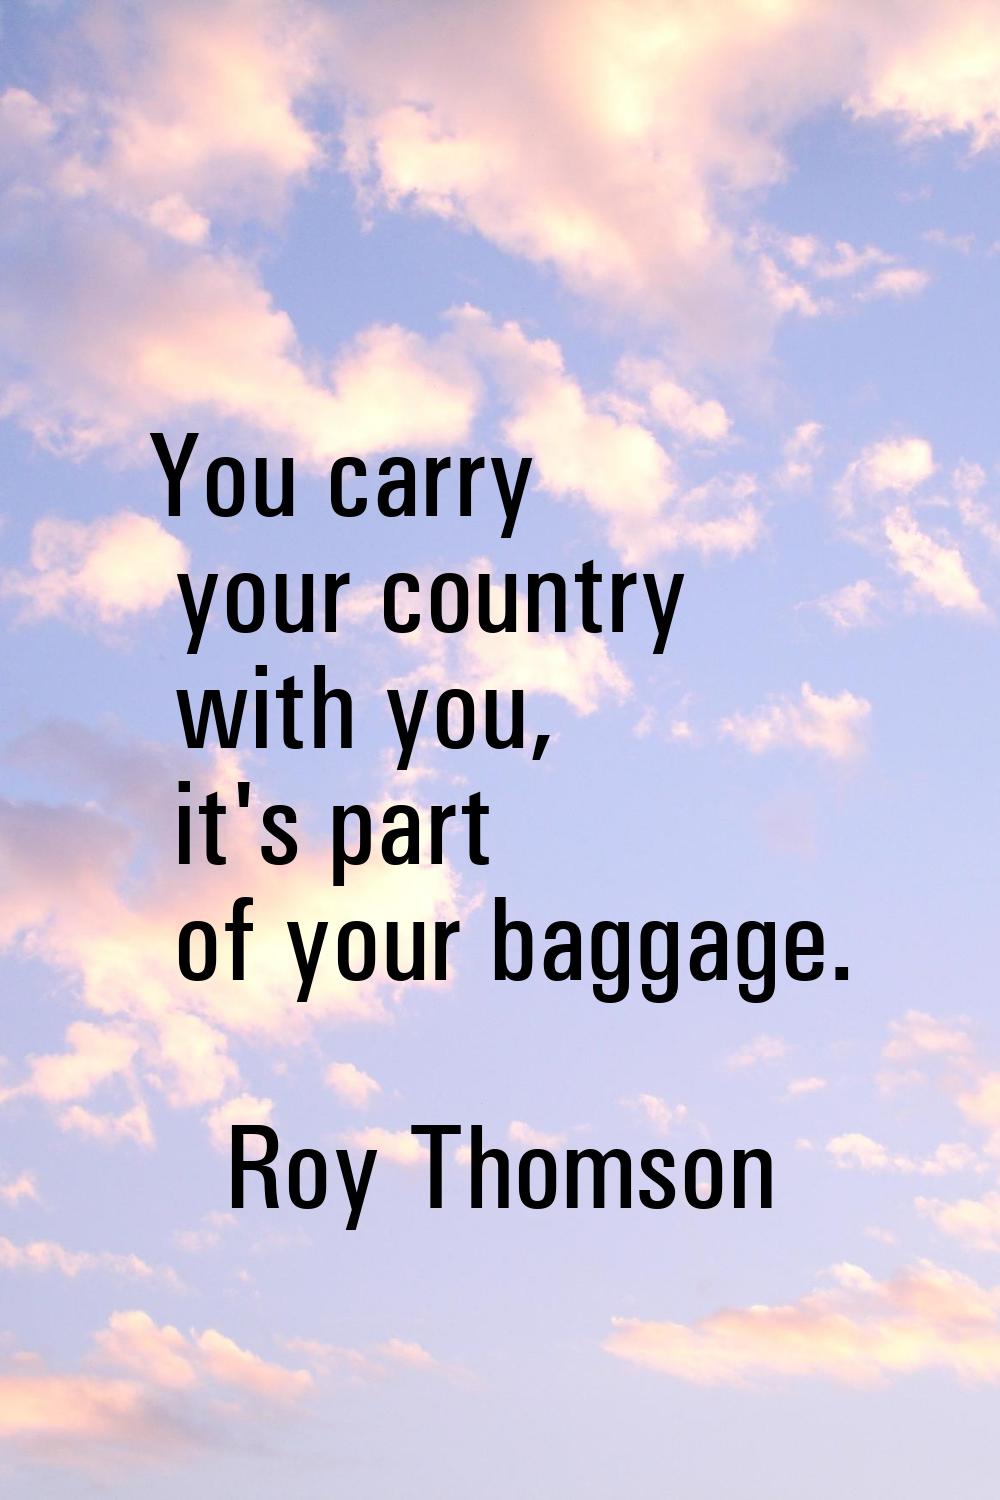 You carry your country with you, it's part of your baggage.